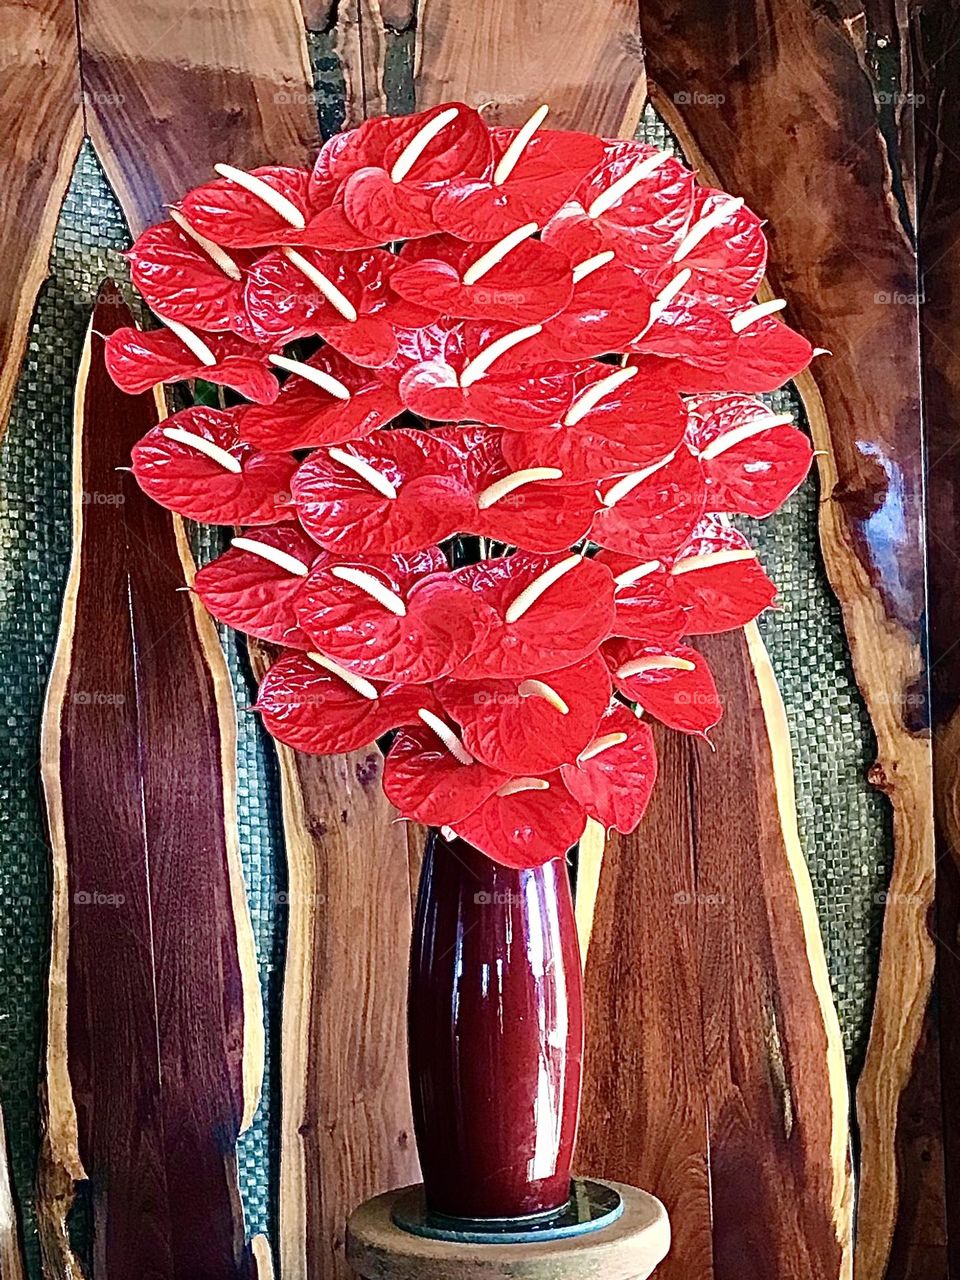 Red Hawaiian Anthurium Flowers in a Vase